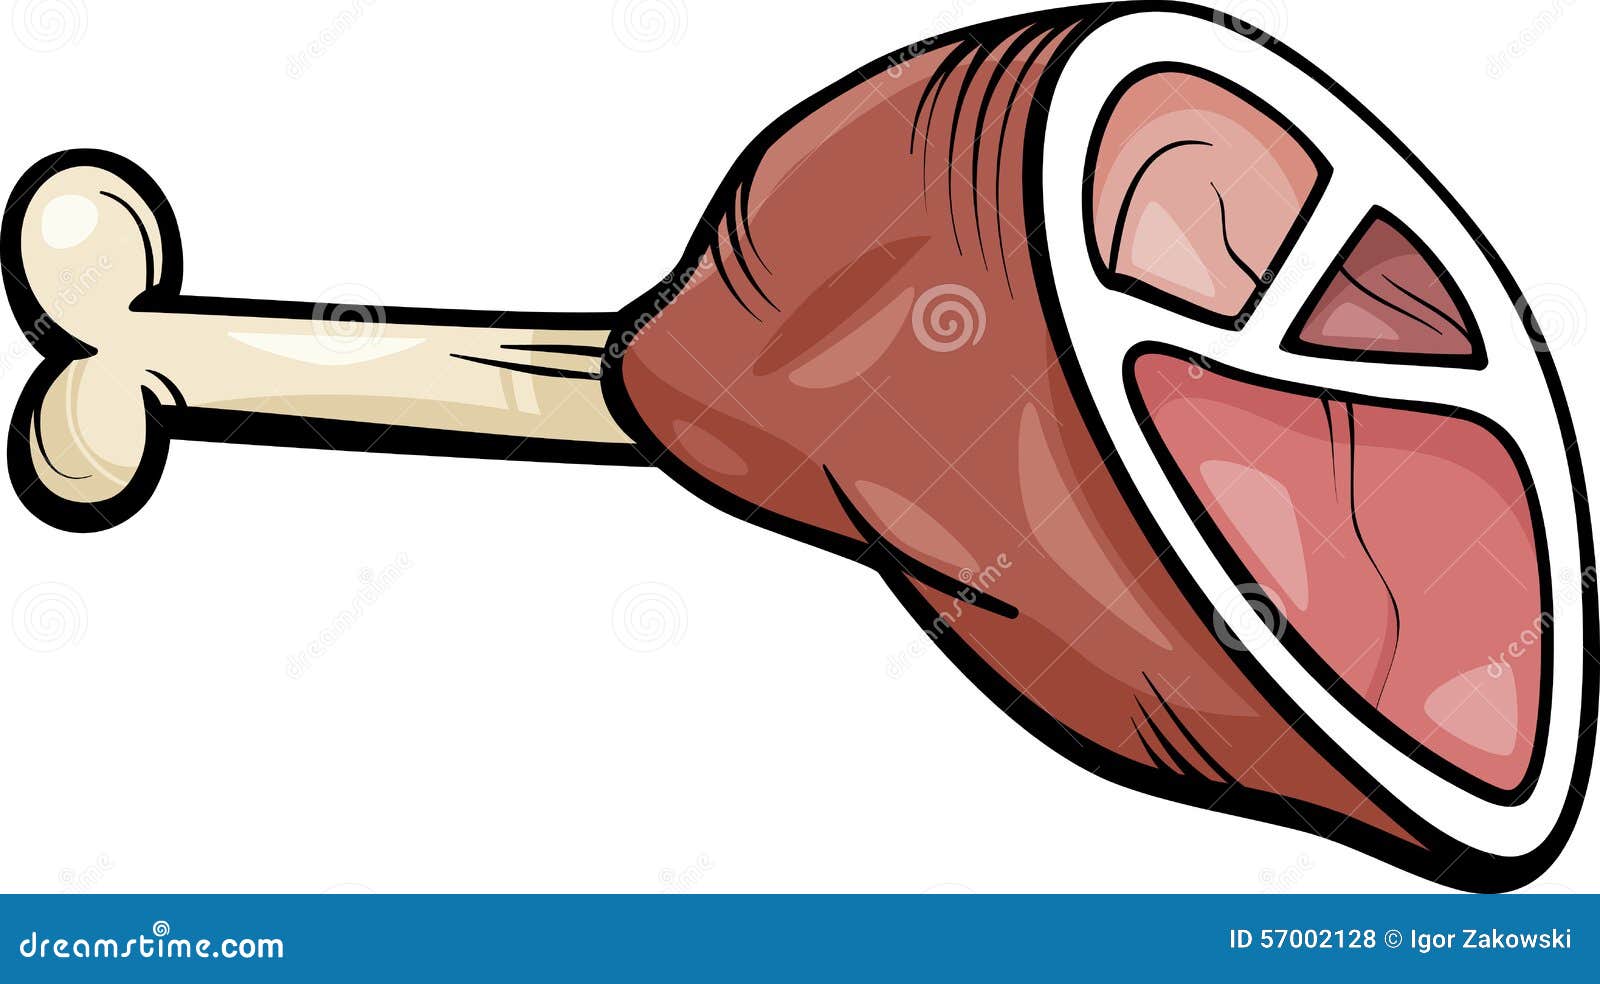 meat clipart images - photo #50